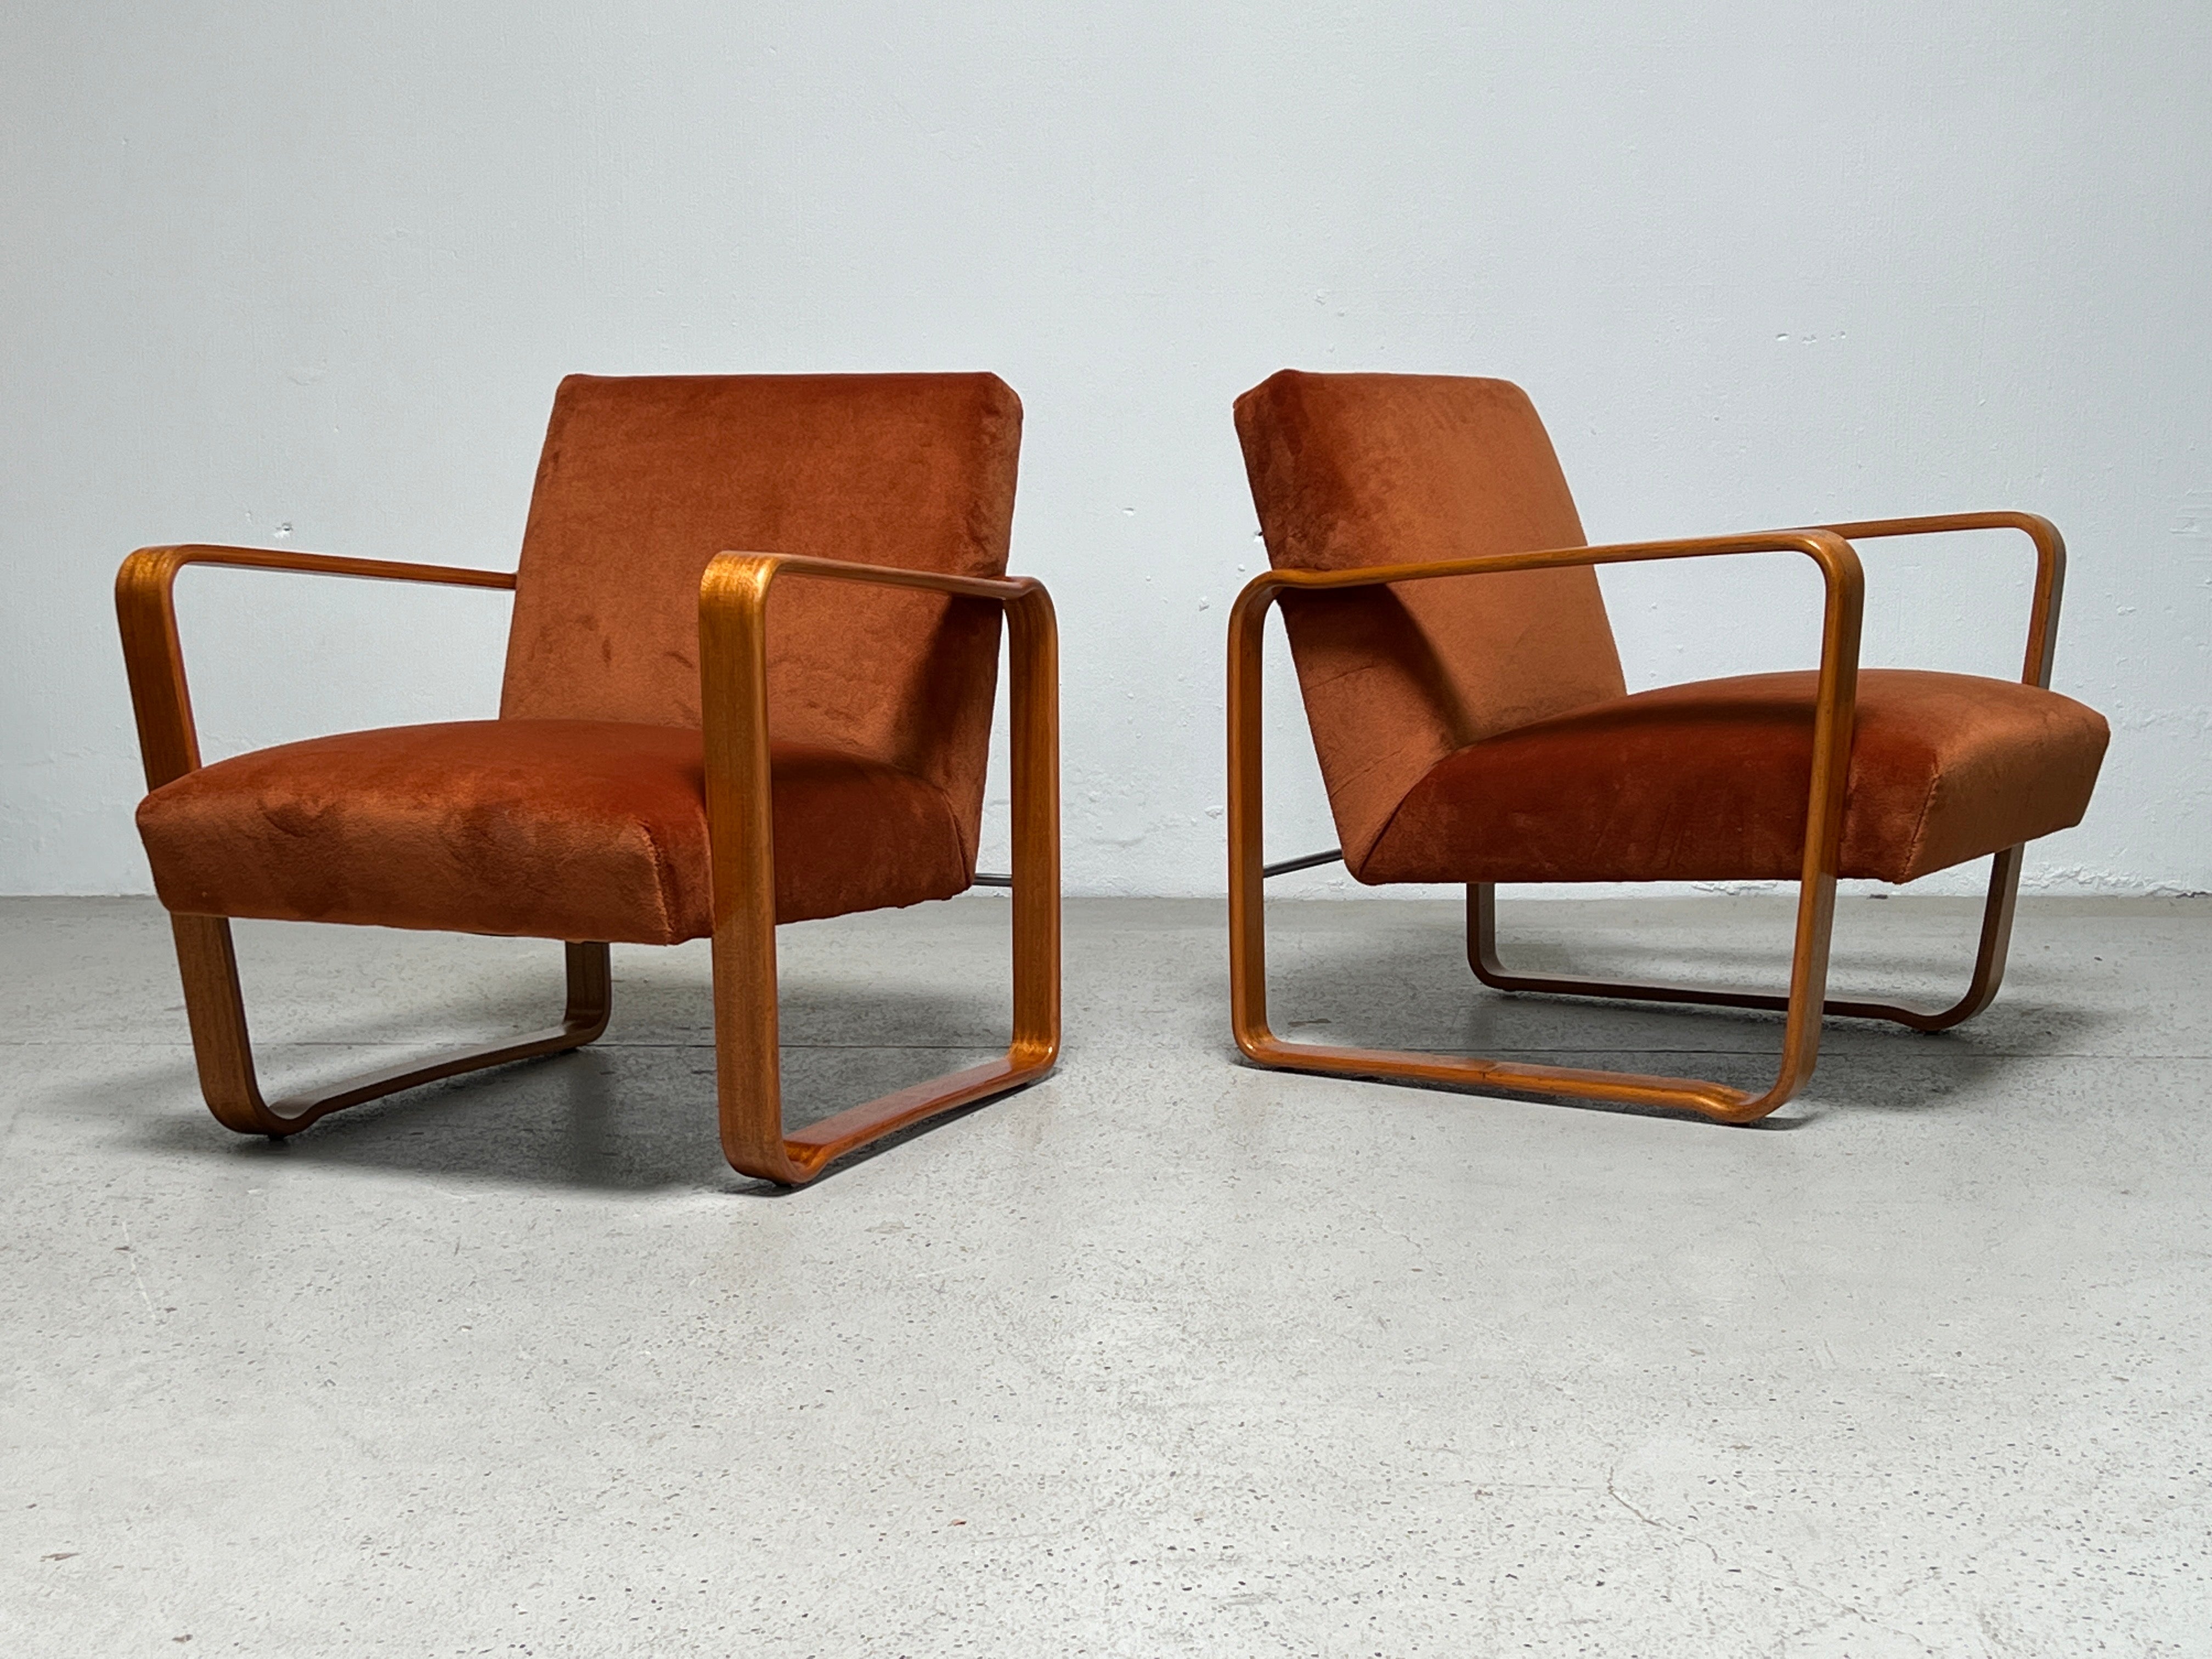 A rare pair of mahogany and mohair tank lounge chairs designed by Edward Wormley for Dunbar.